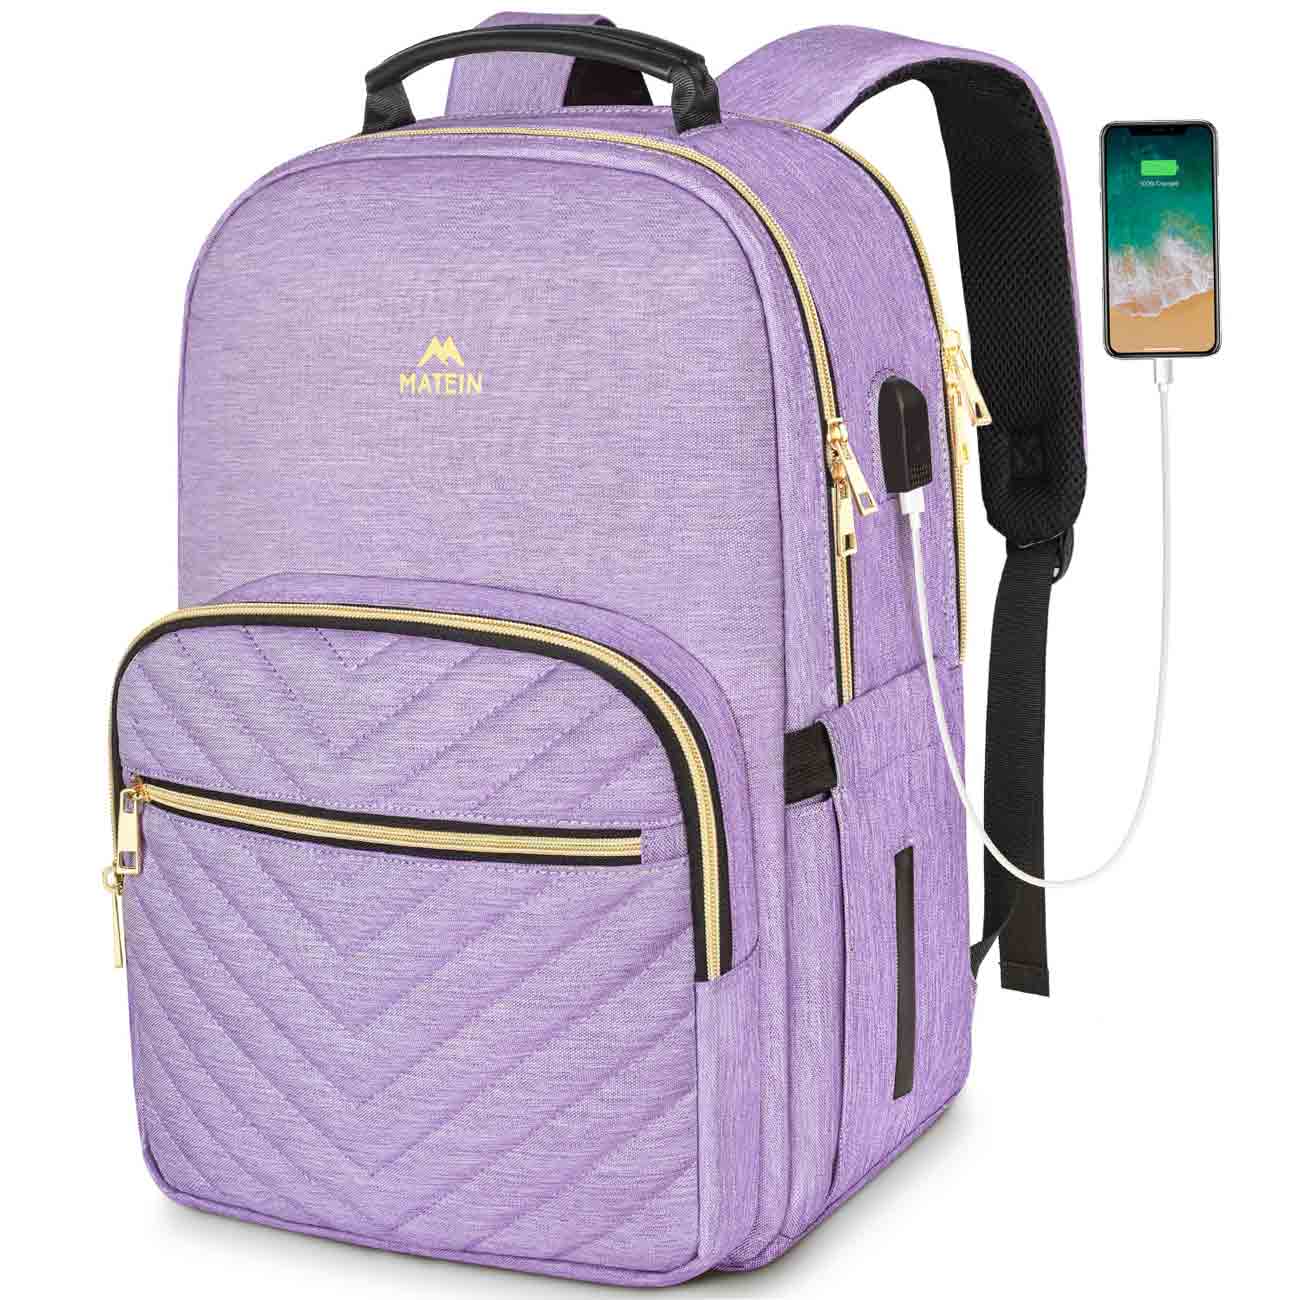 Wholesale Women Fashion Backpacks15.6Inch Laptop Backpack with USB Charger  Female Back Pack School Bags For Teenage Girls From m.